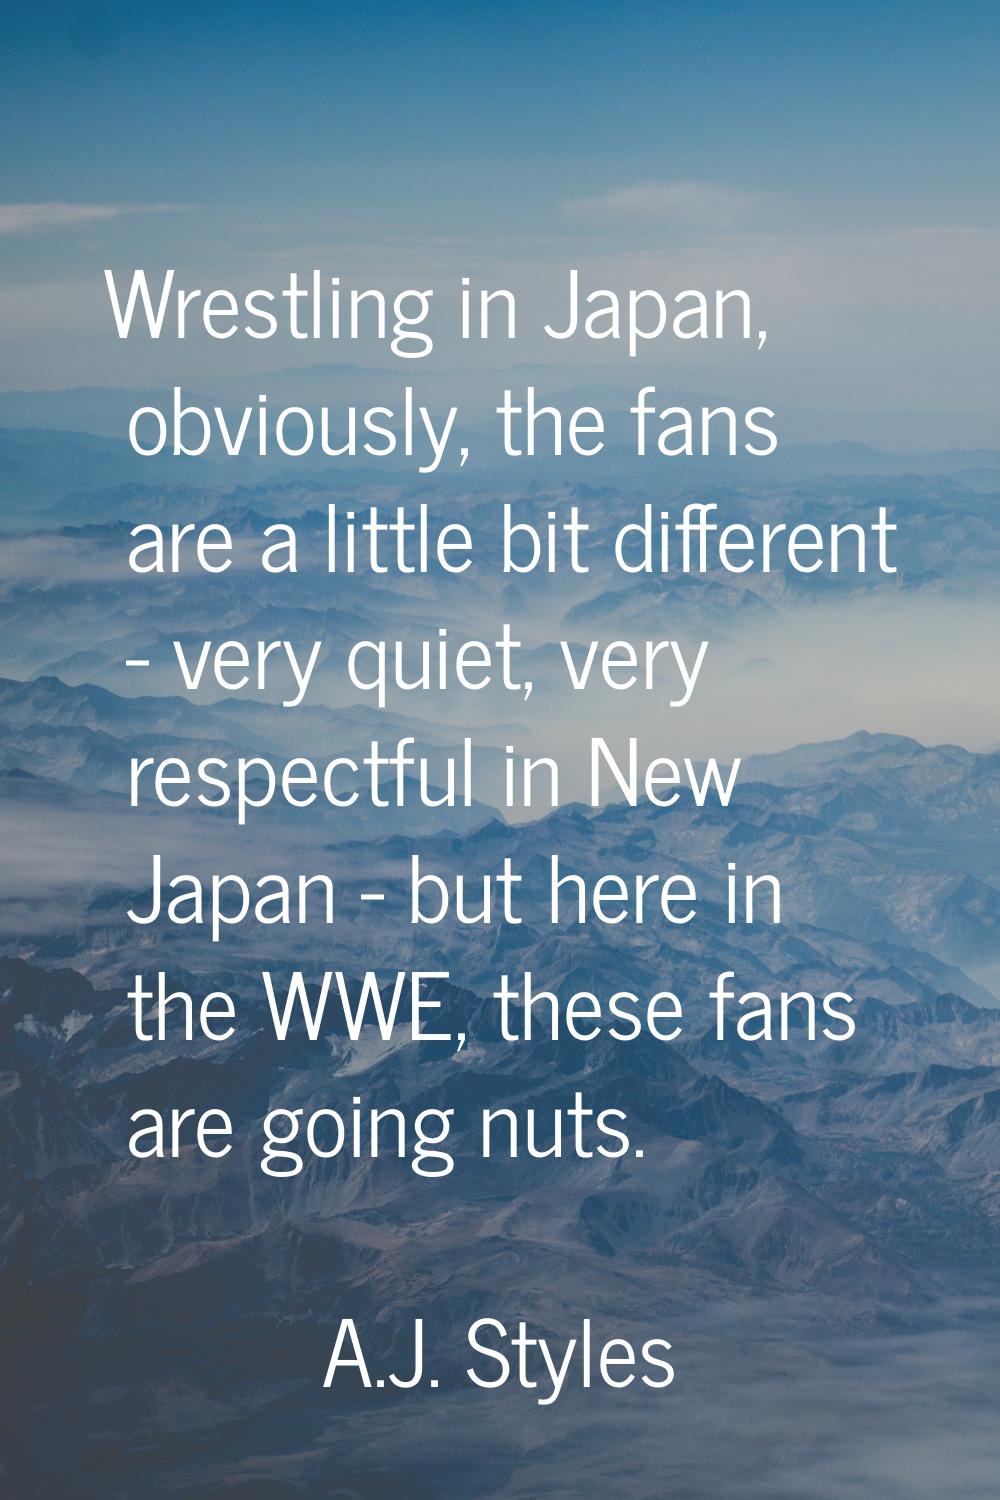 Wrestling in Japan, obviously, the fans are a little bit different - very quiet, very respectful in